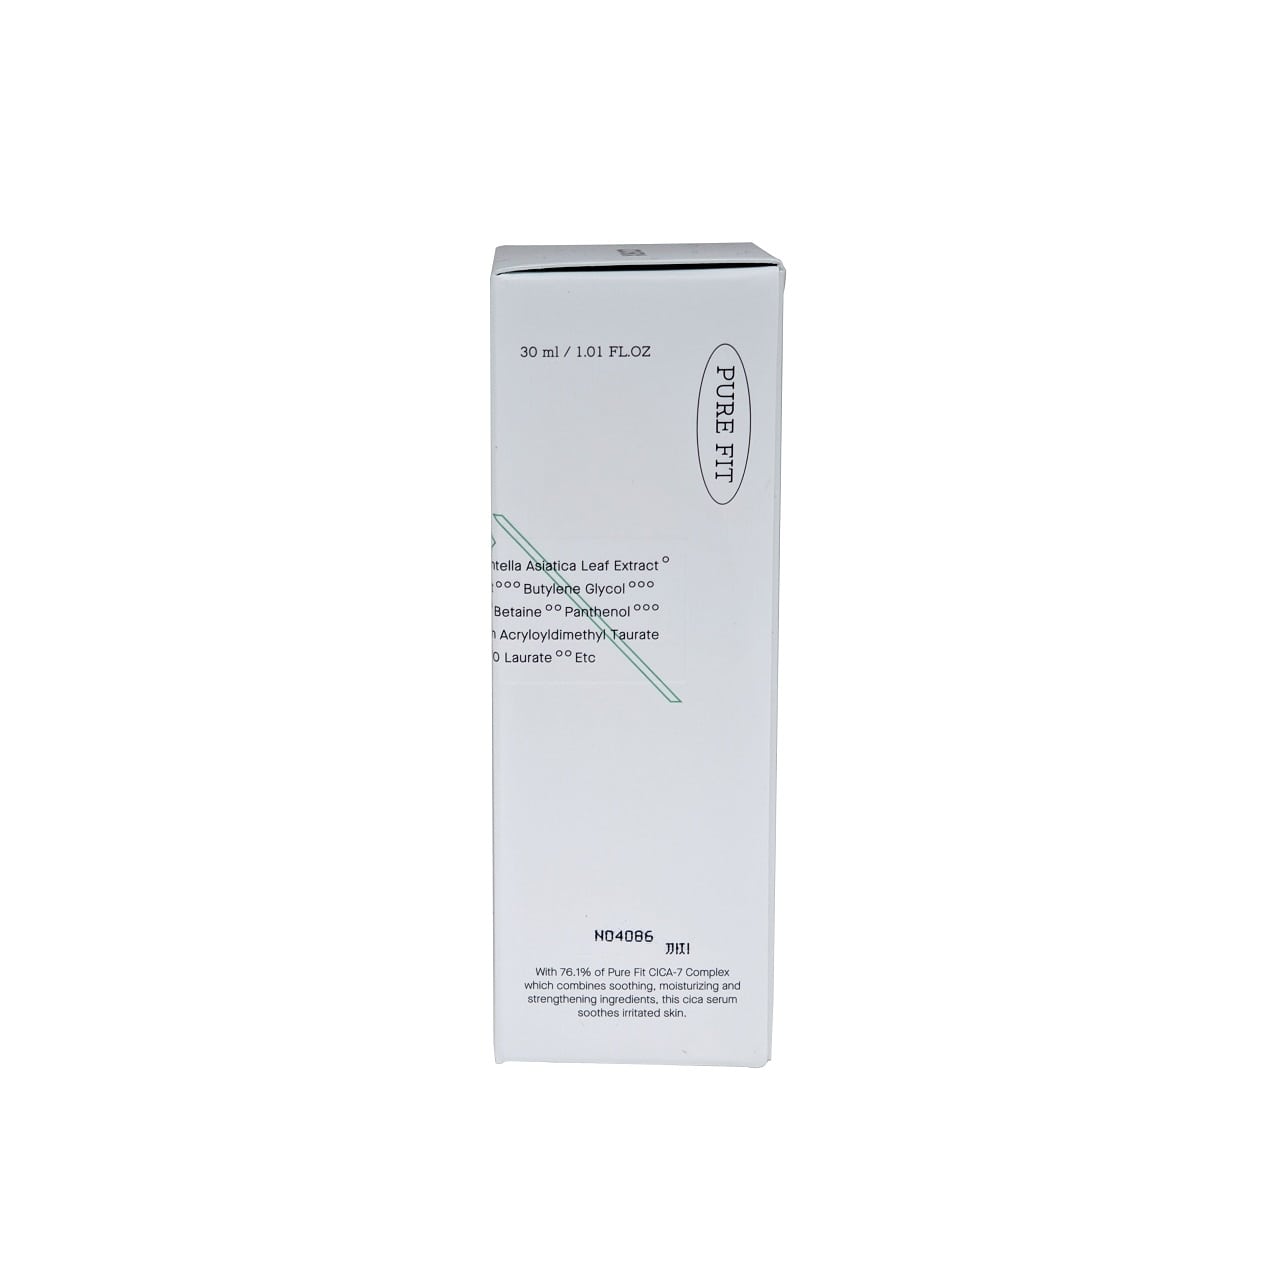 Product label for COSRX Pure Fit Cica Serum